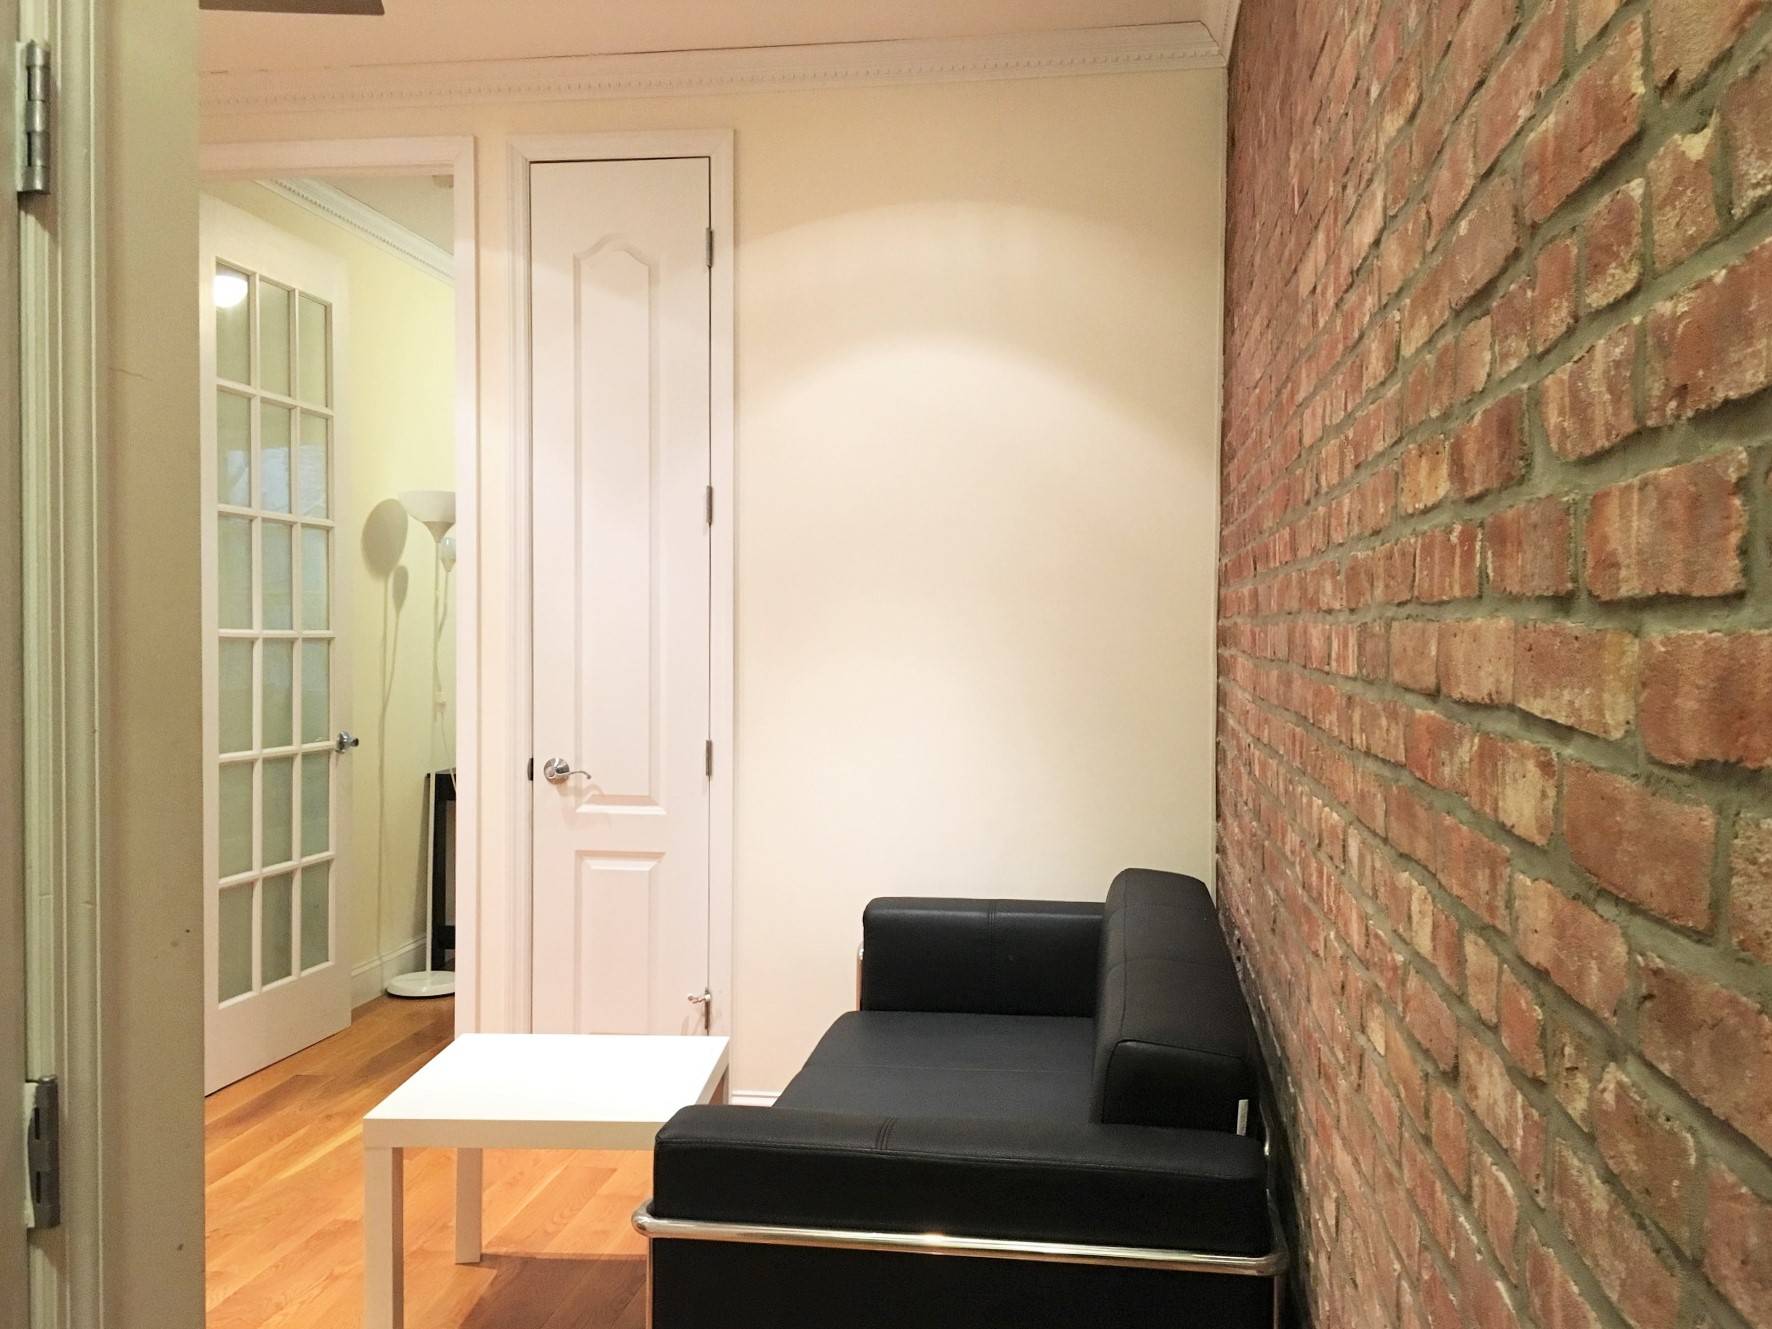 Fully furnished 3 bedrooms 2 bathroom apartment located on the 3rd floor of a walk up building at West 106th Street, in Upper West Side.